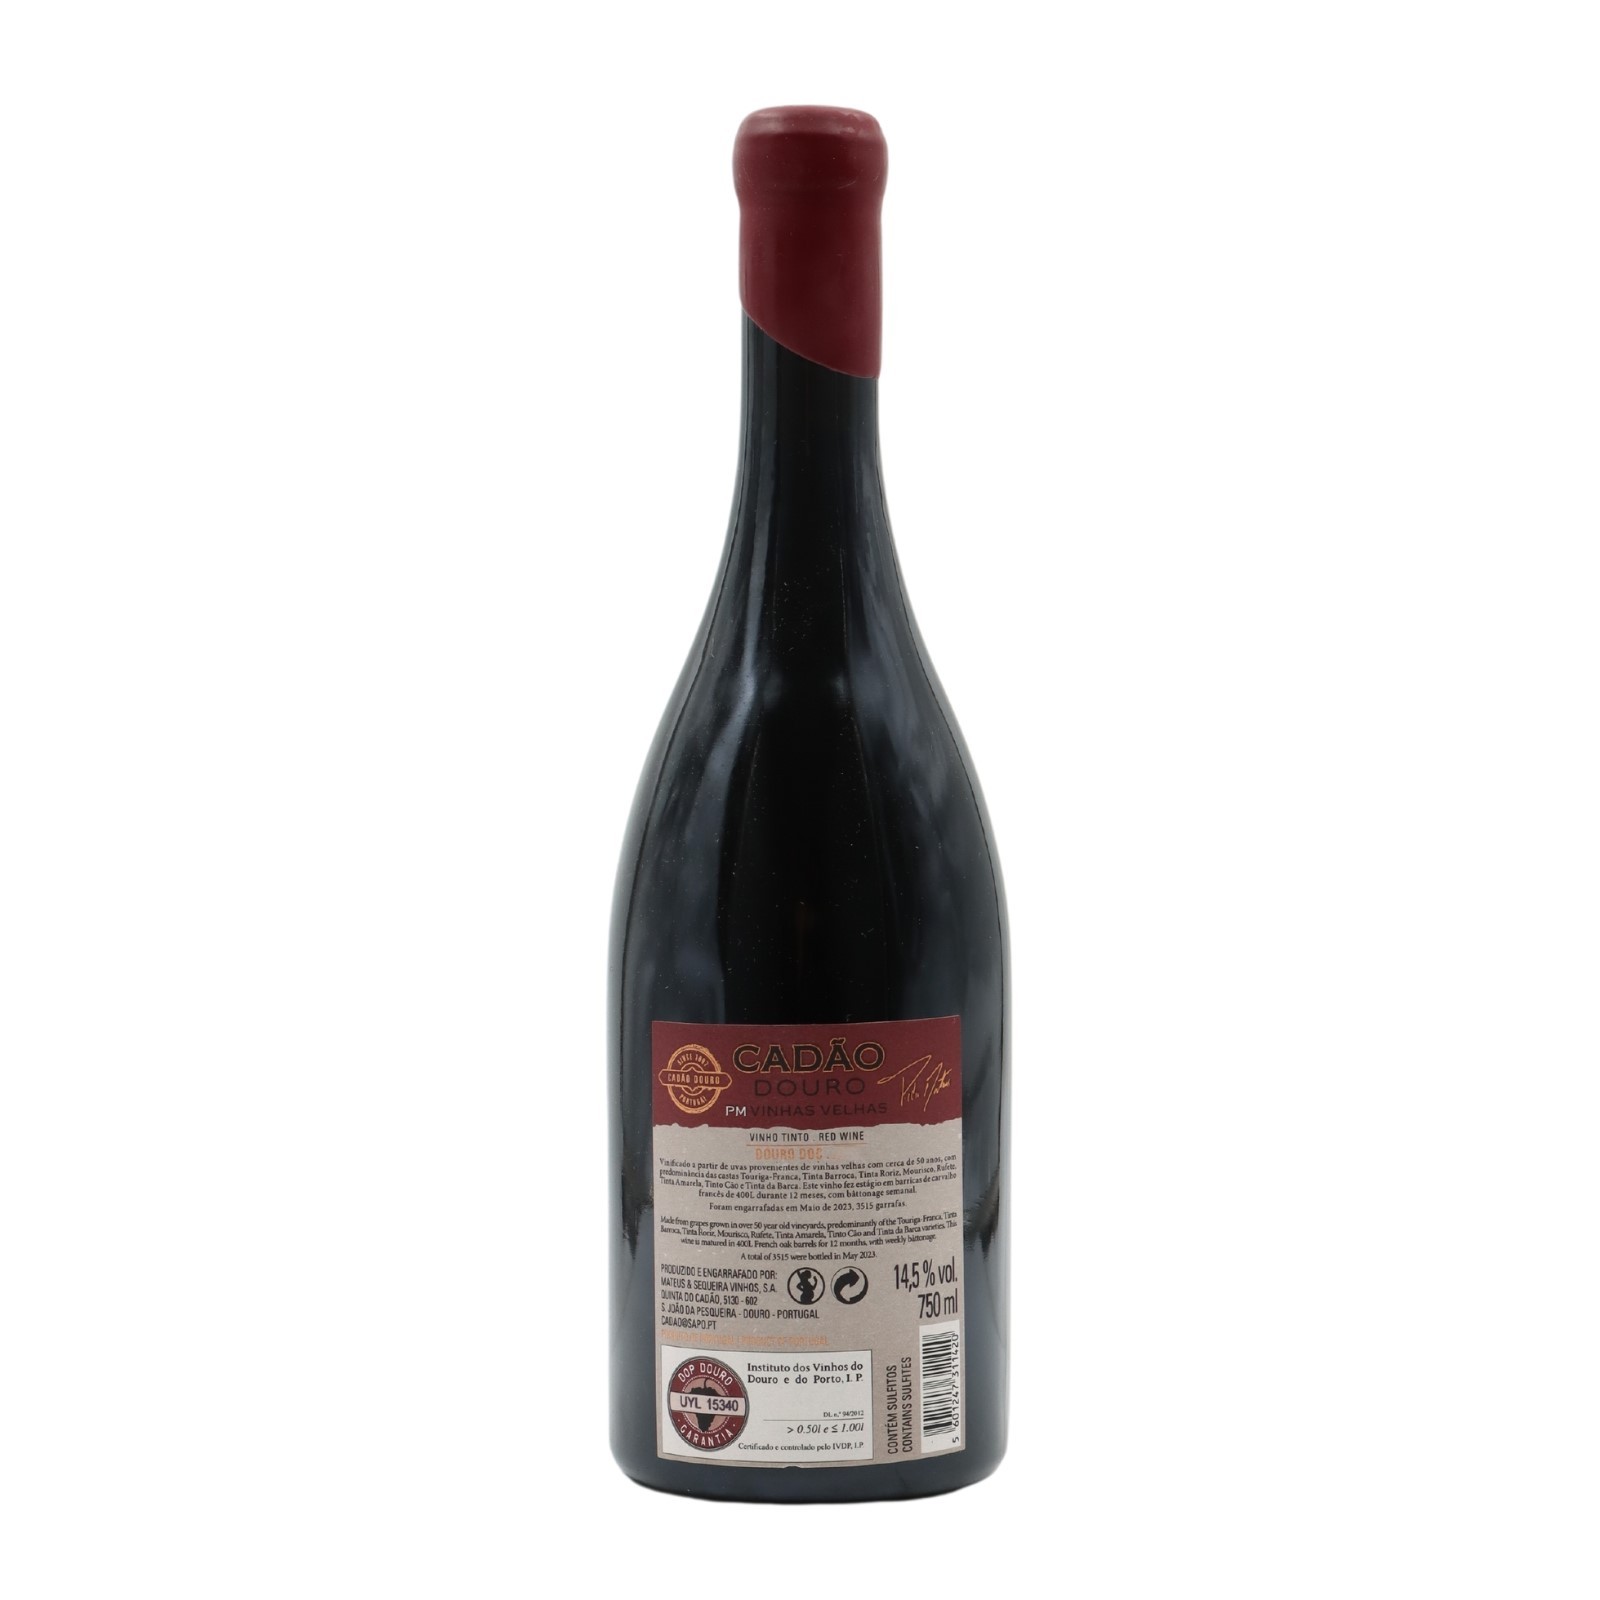 Cadão PM Old Vines Red 2019